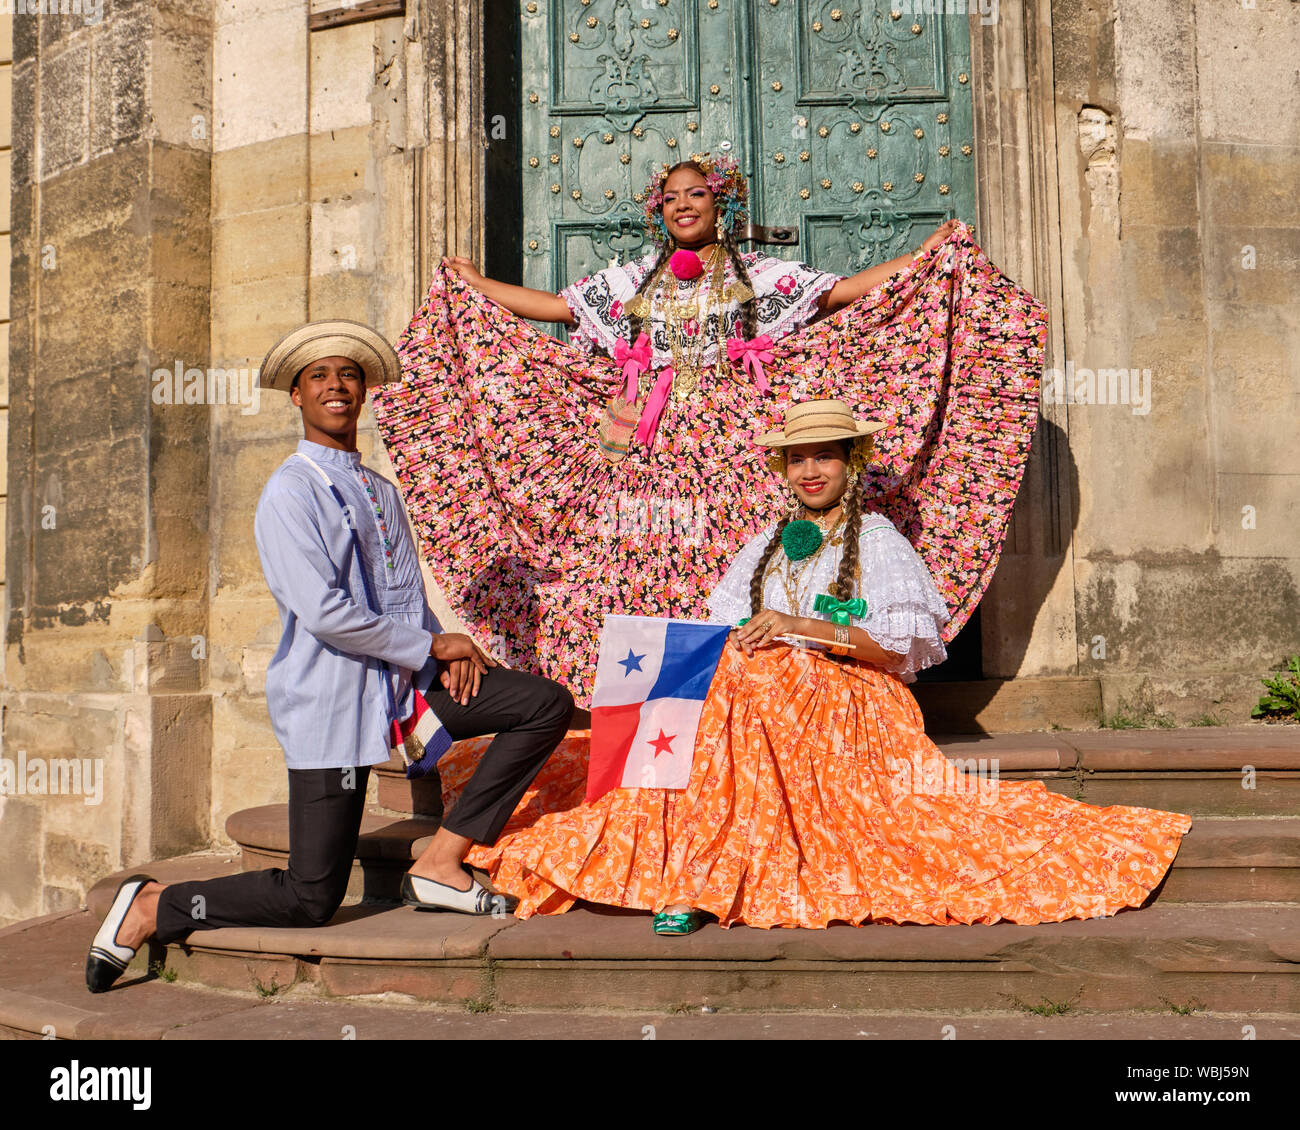 Member of Panama Folklore group in local costume during fashion show of Etnovyr Festival in street of Lviv, Ukraine - August 24, 2019 Stock Photo